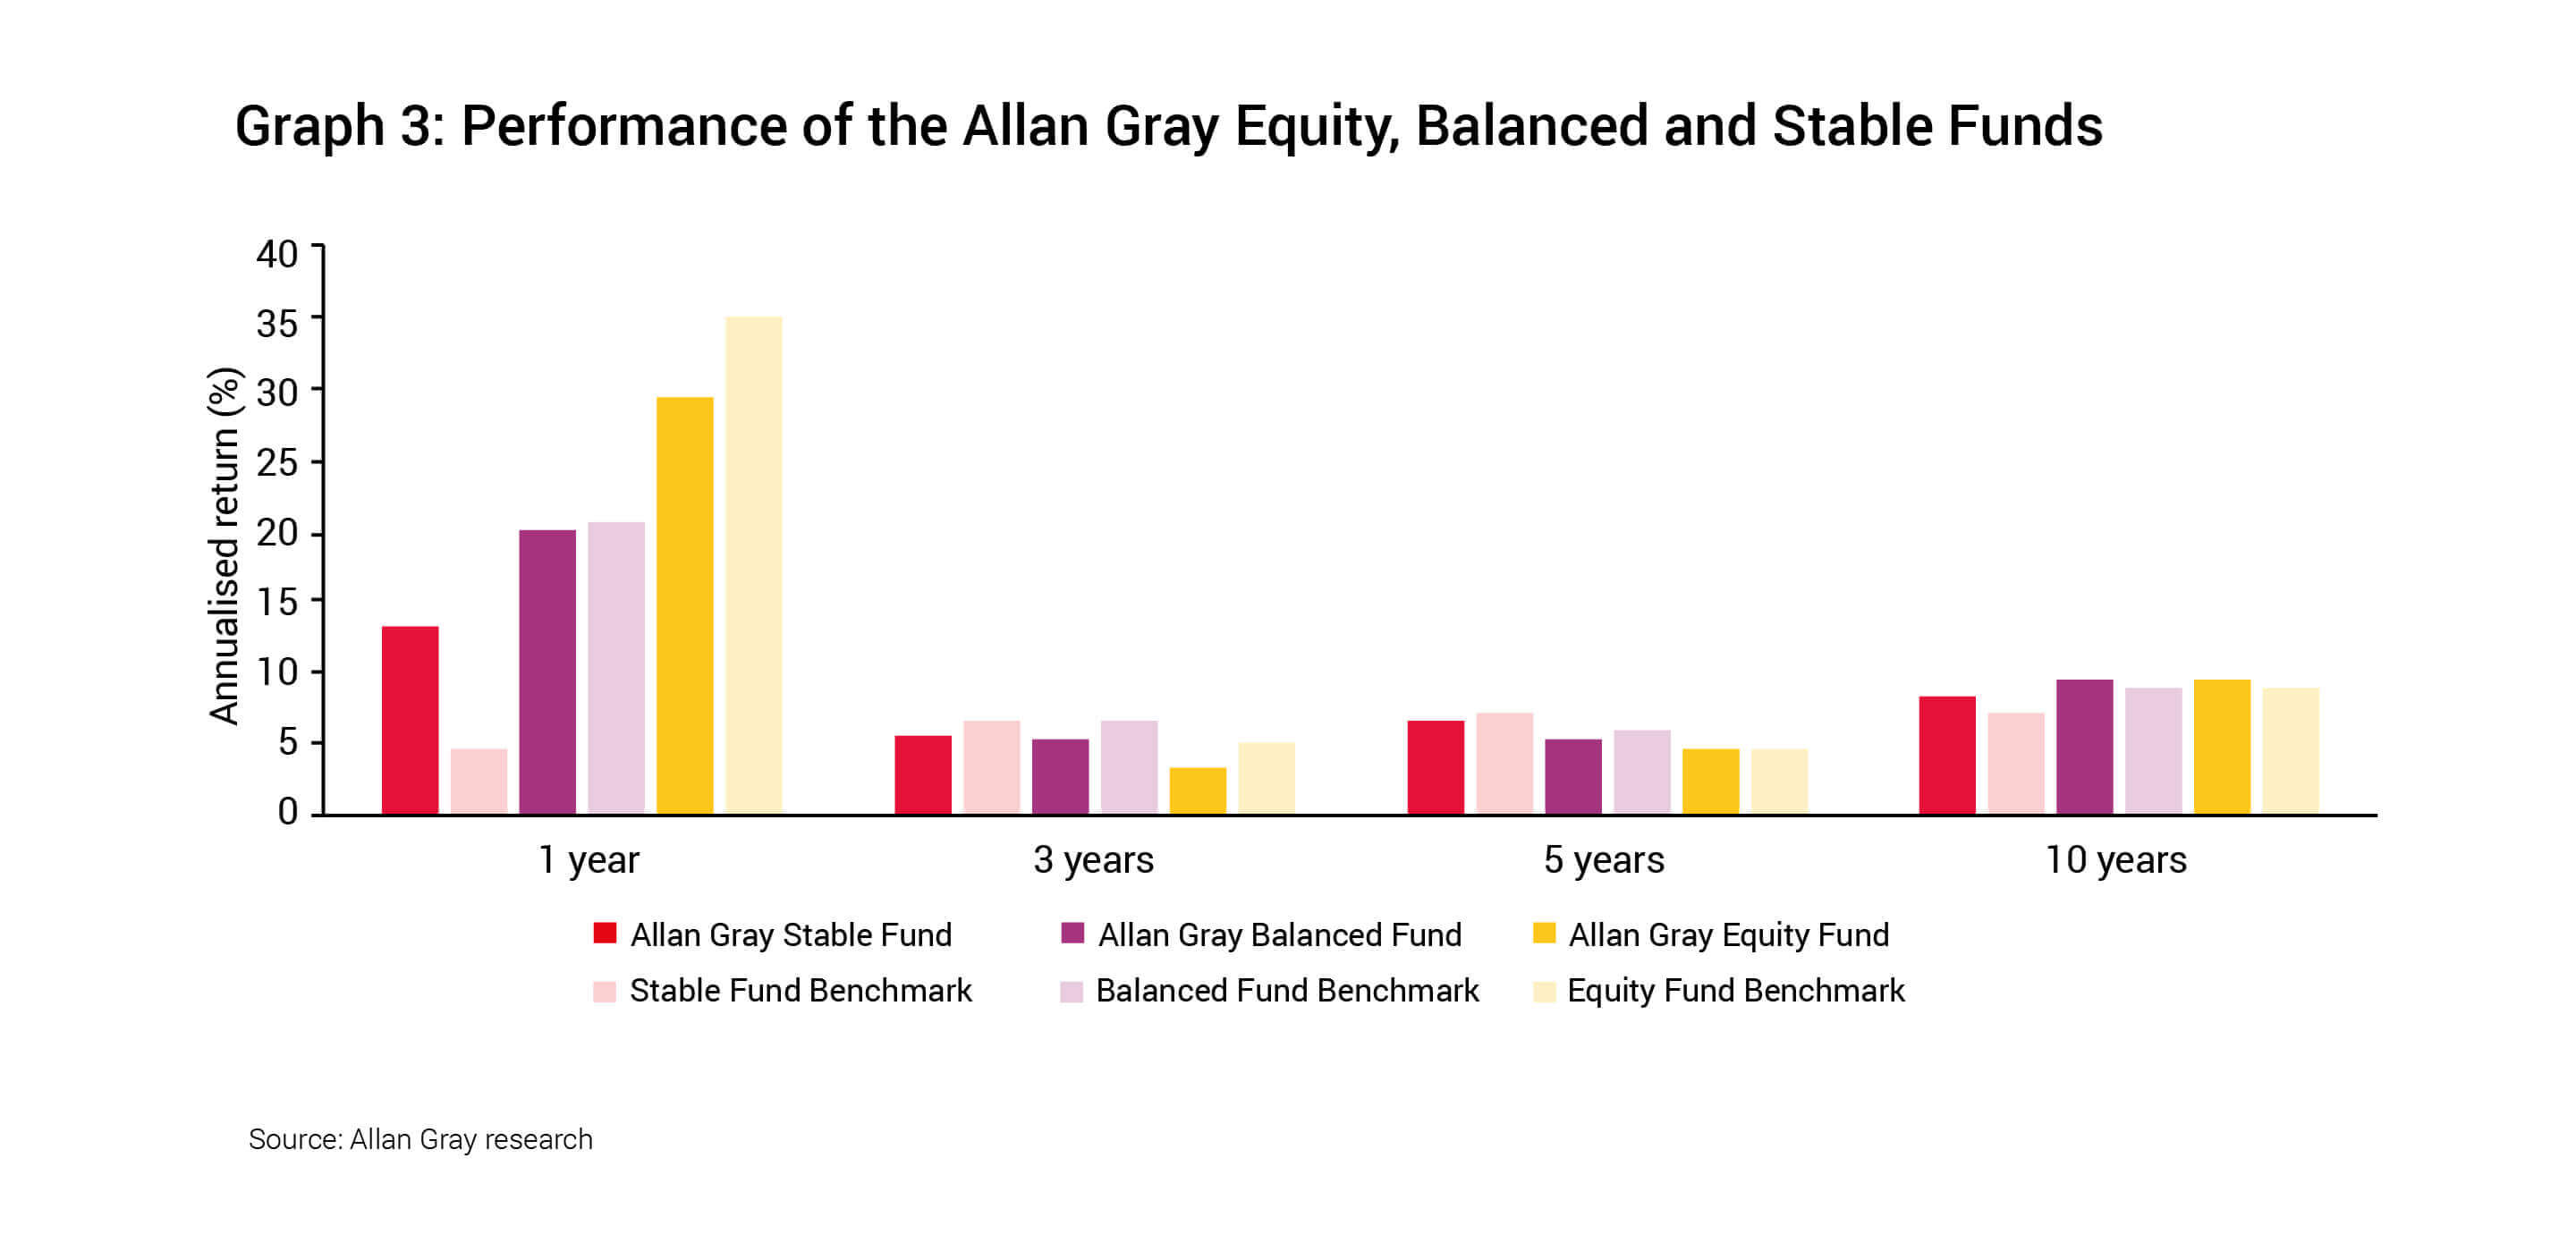 Performance of the Allan Gray Equity, Balanced and Stable Funds